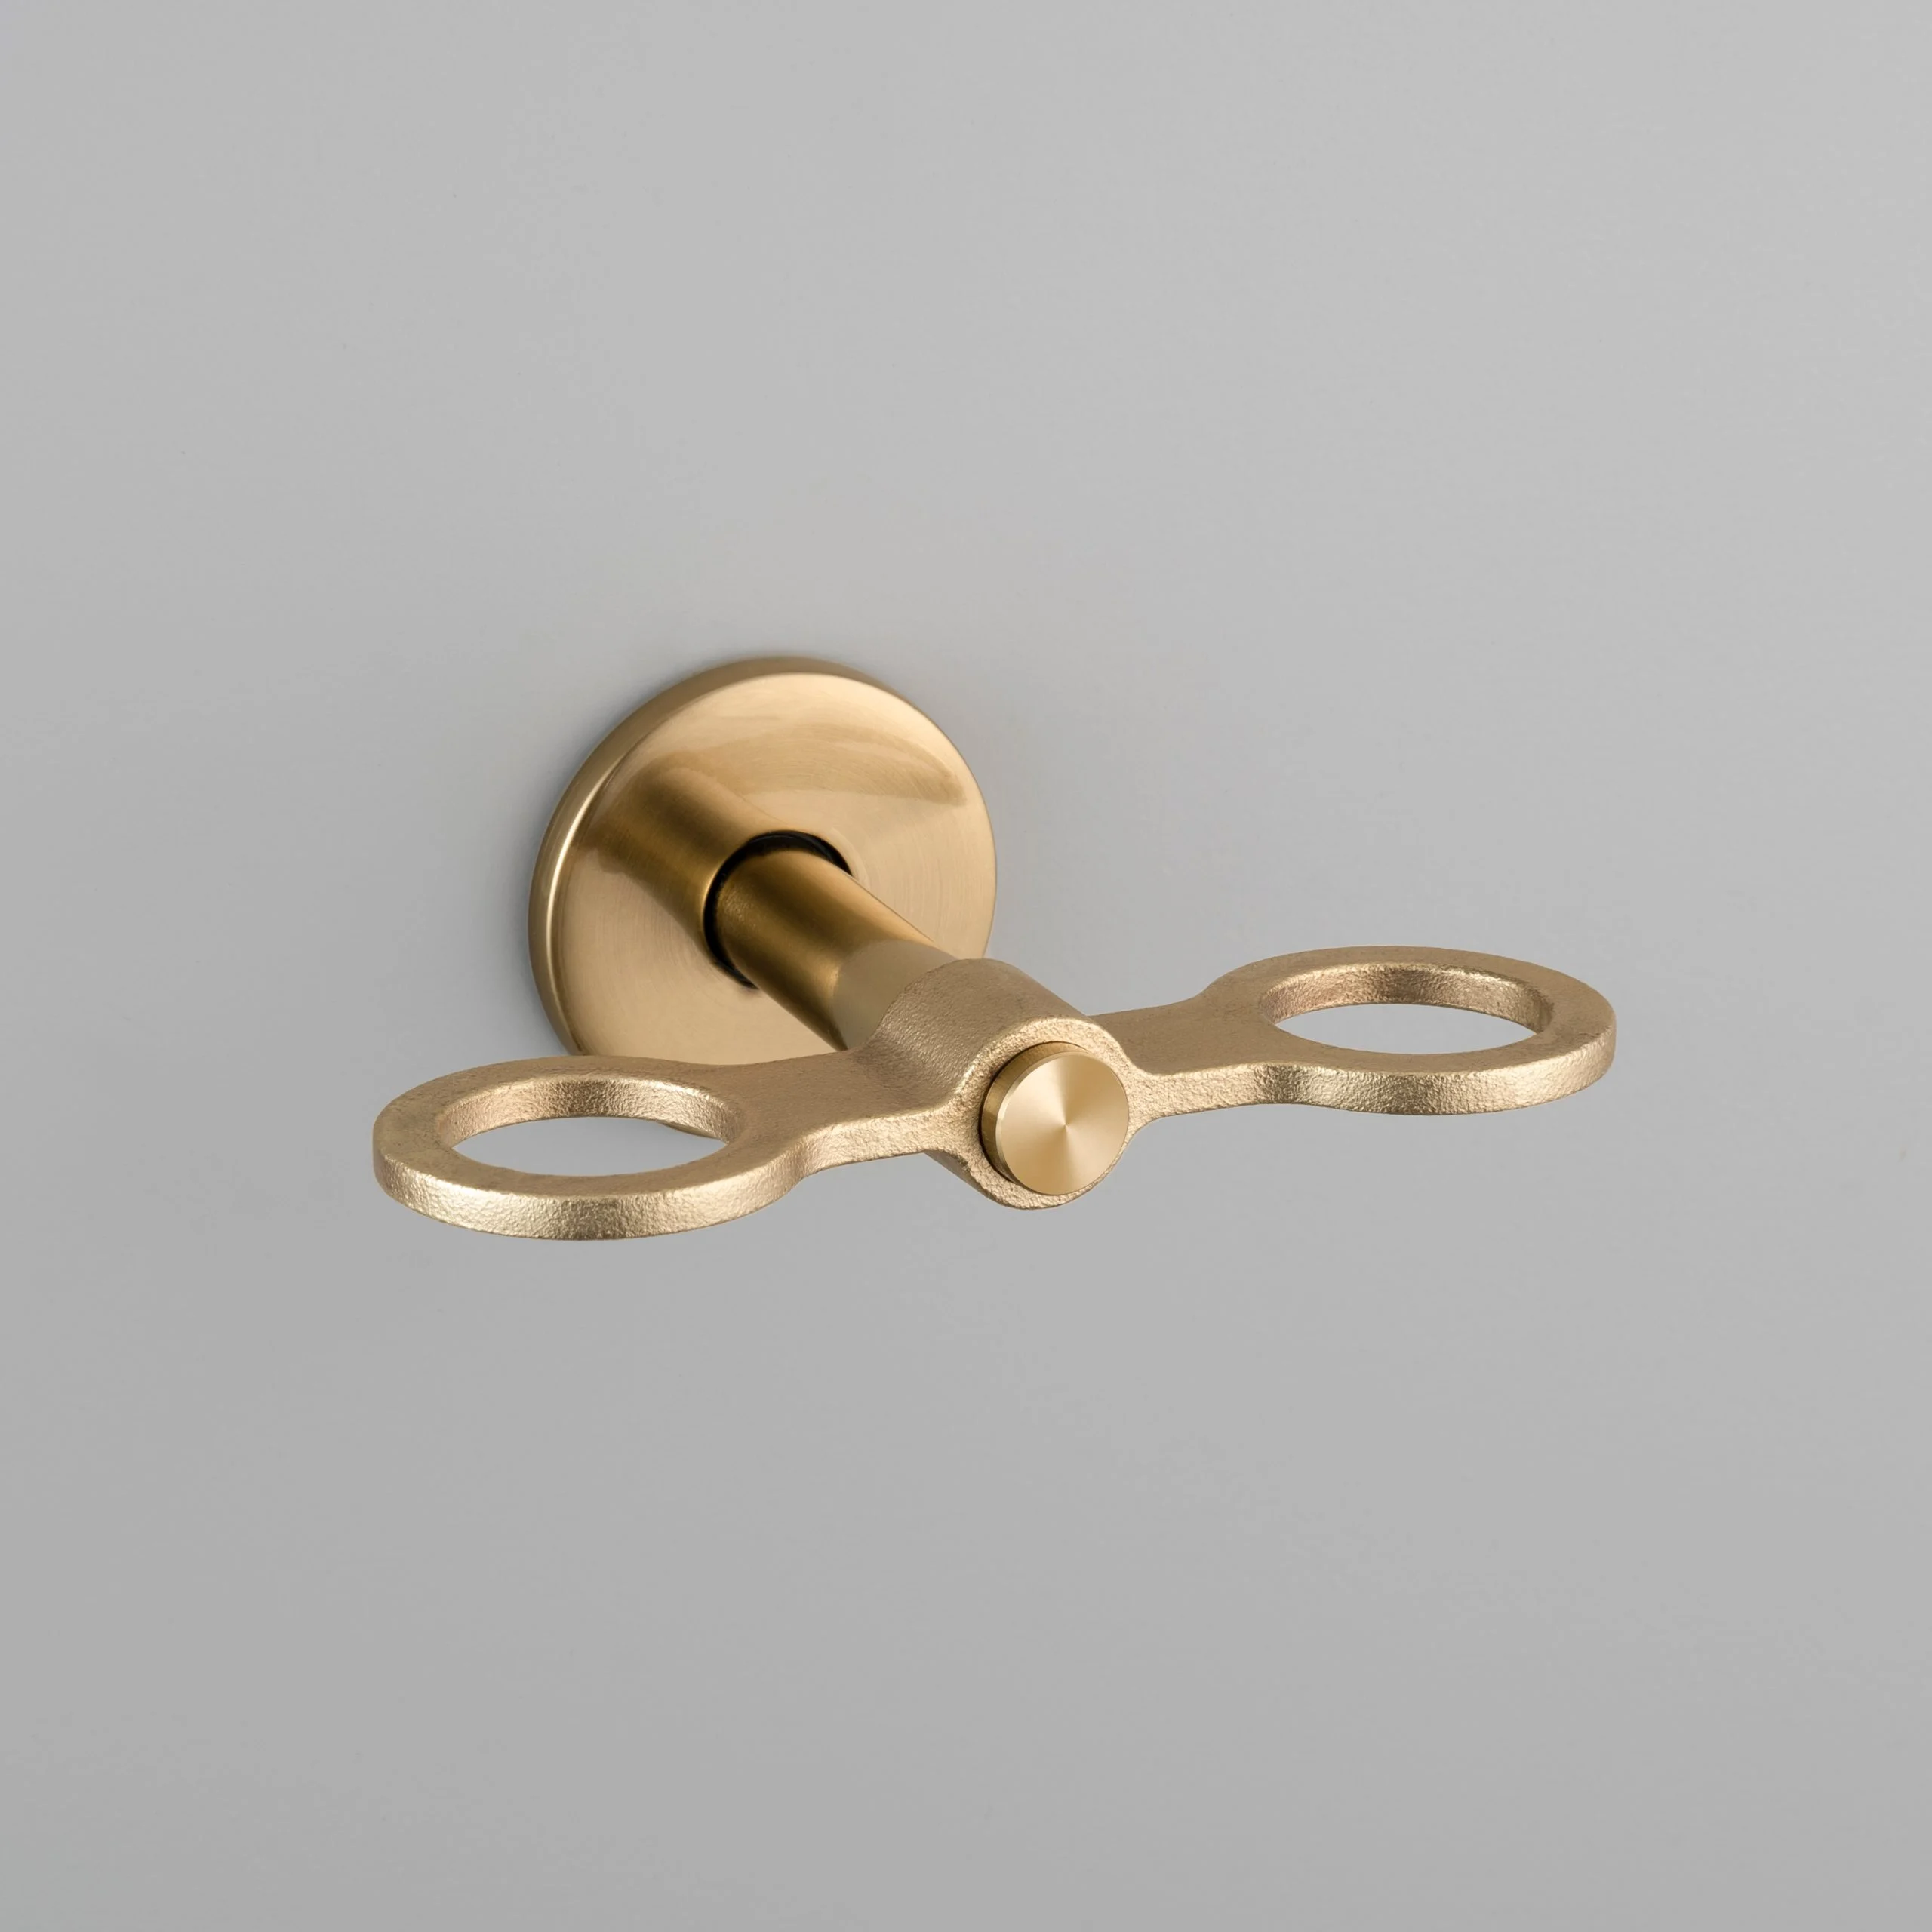 BP_Cast_Soap_Holder_Double_Brass_A1_Web-scaled